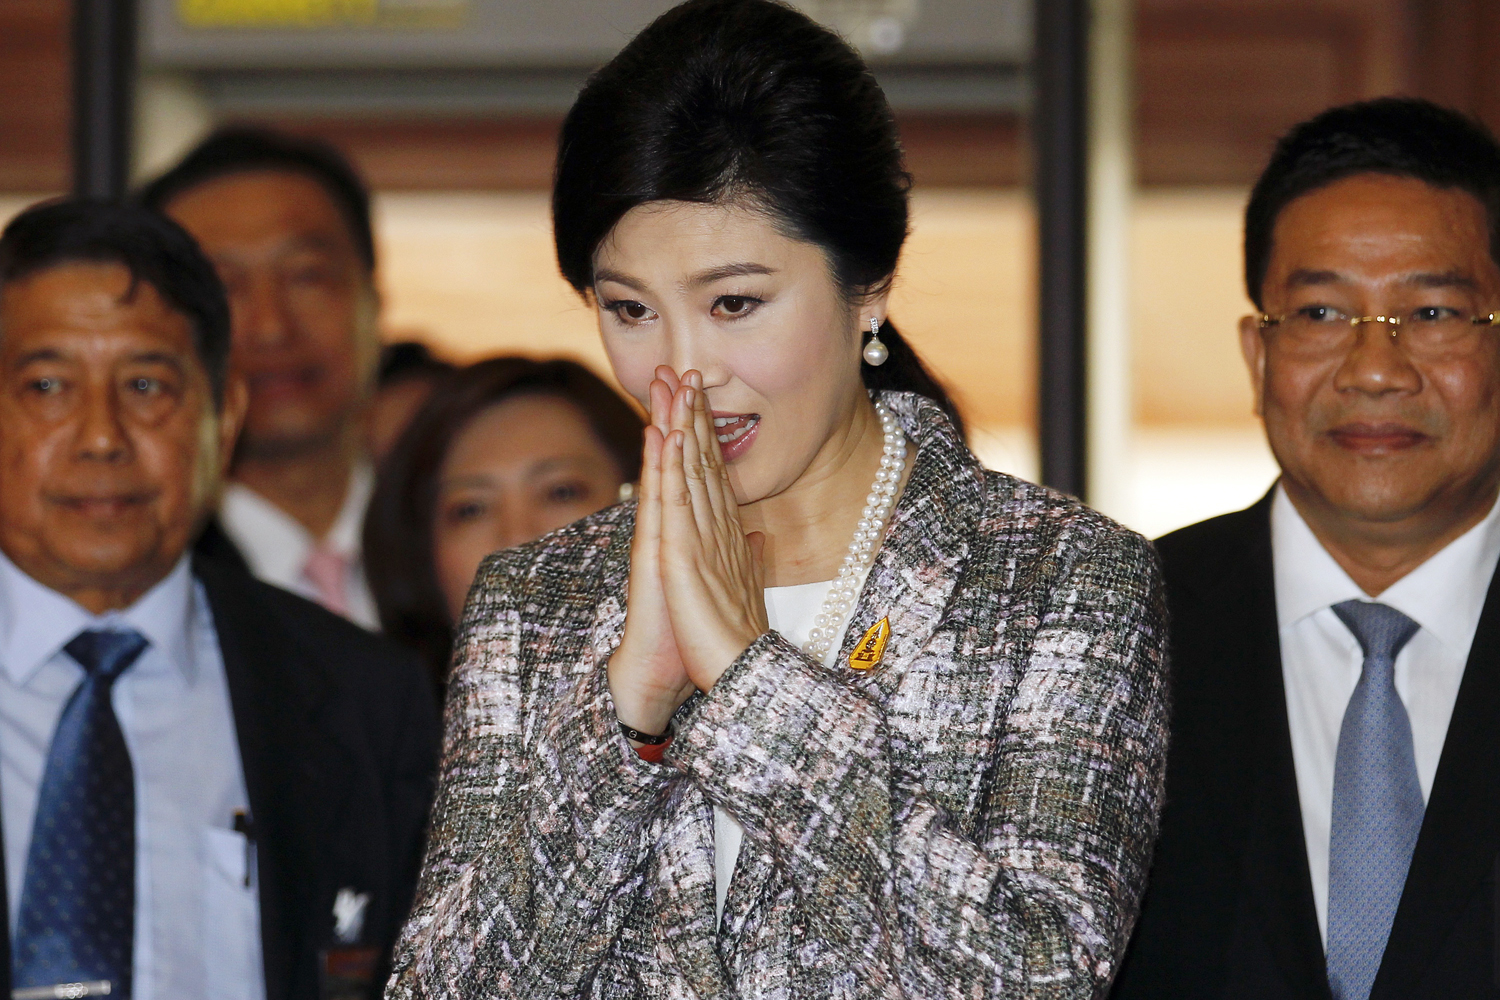 Ousted former Prime Minister Yingluck Shinawatra greets in a traditional way as she arrives at Parliament before the National Legislative Assembly meeting in Bangkok